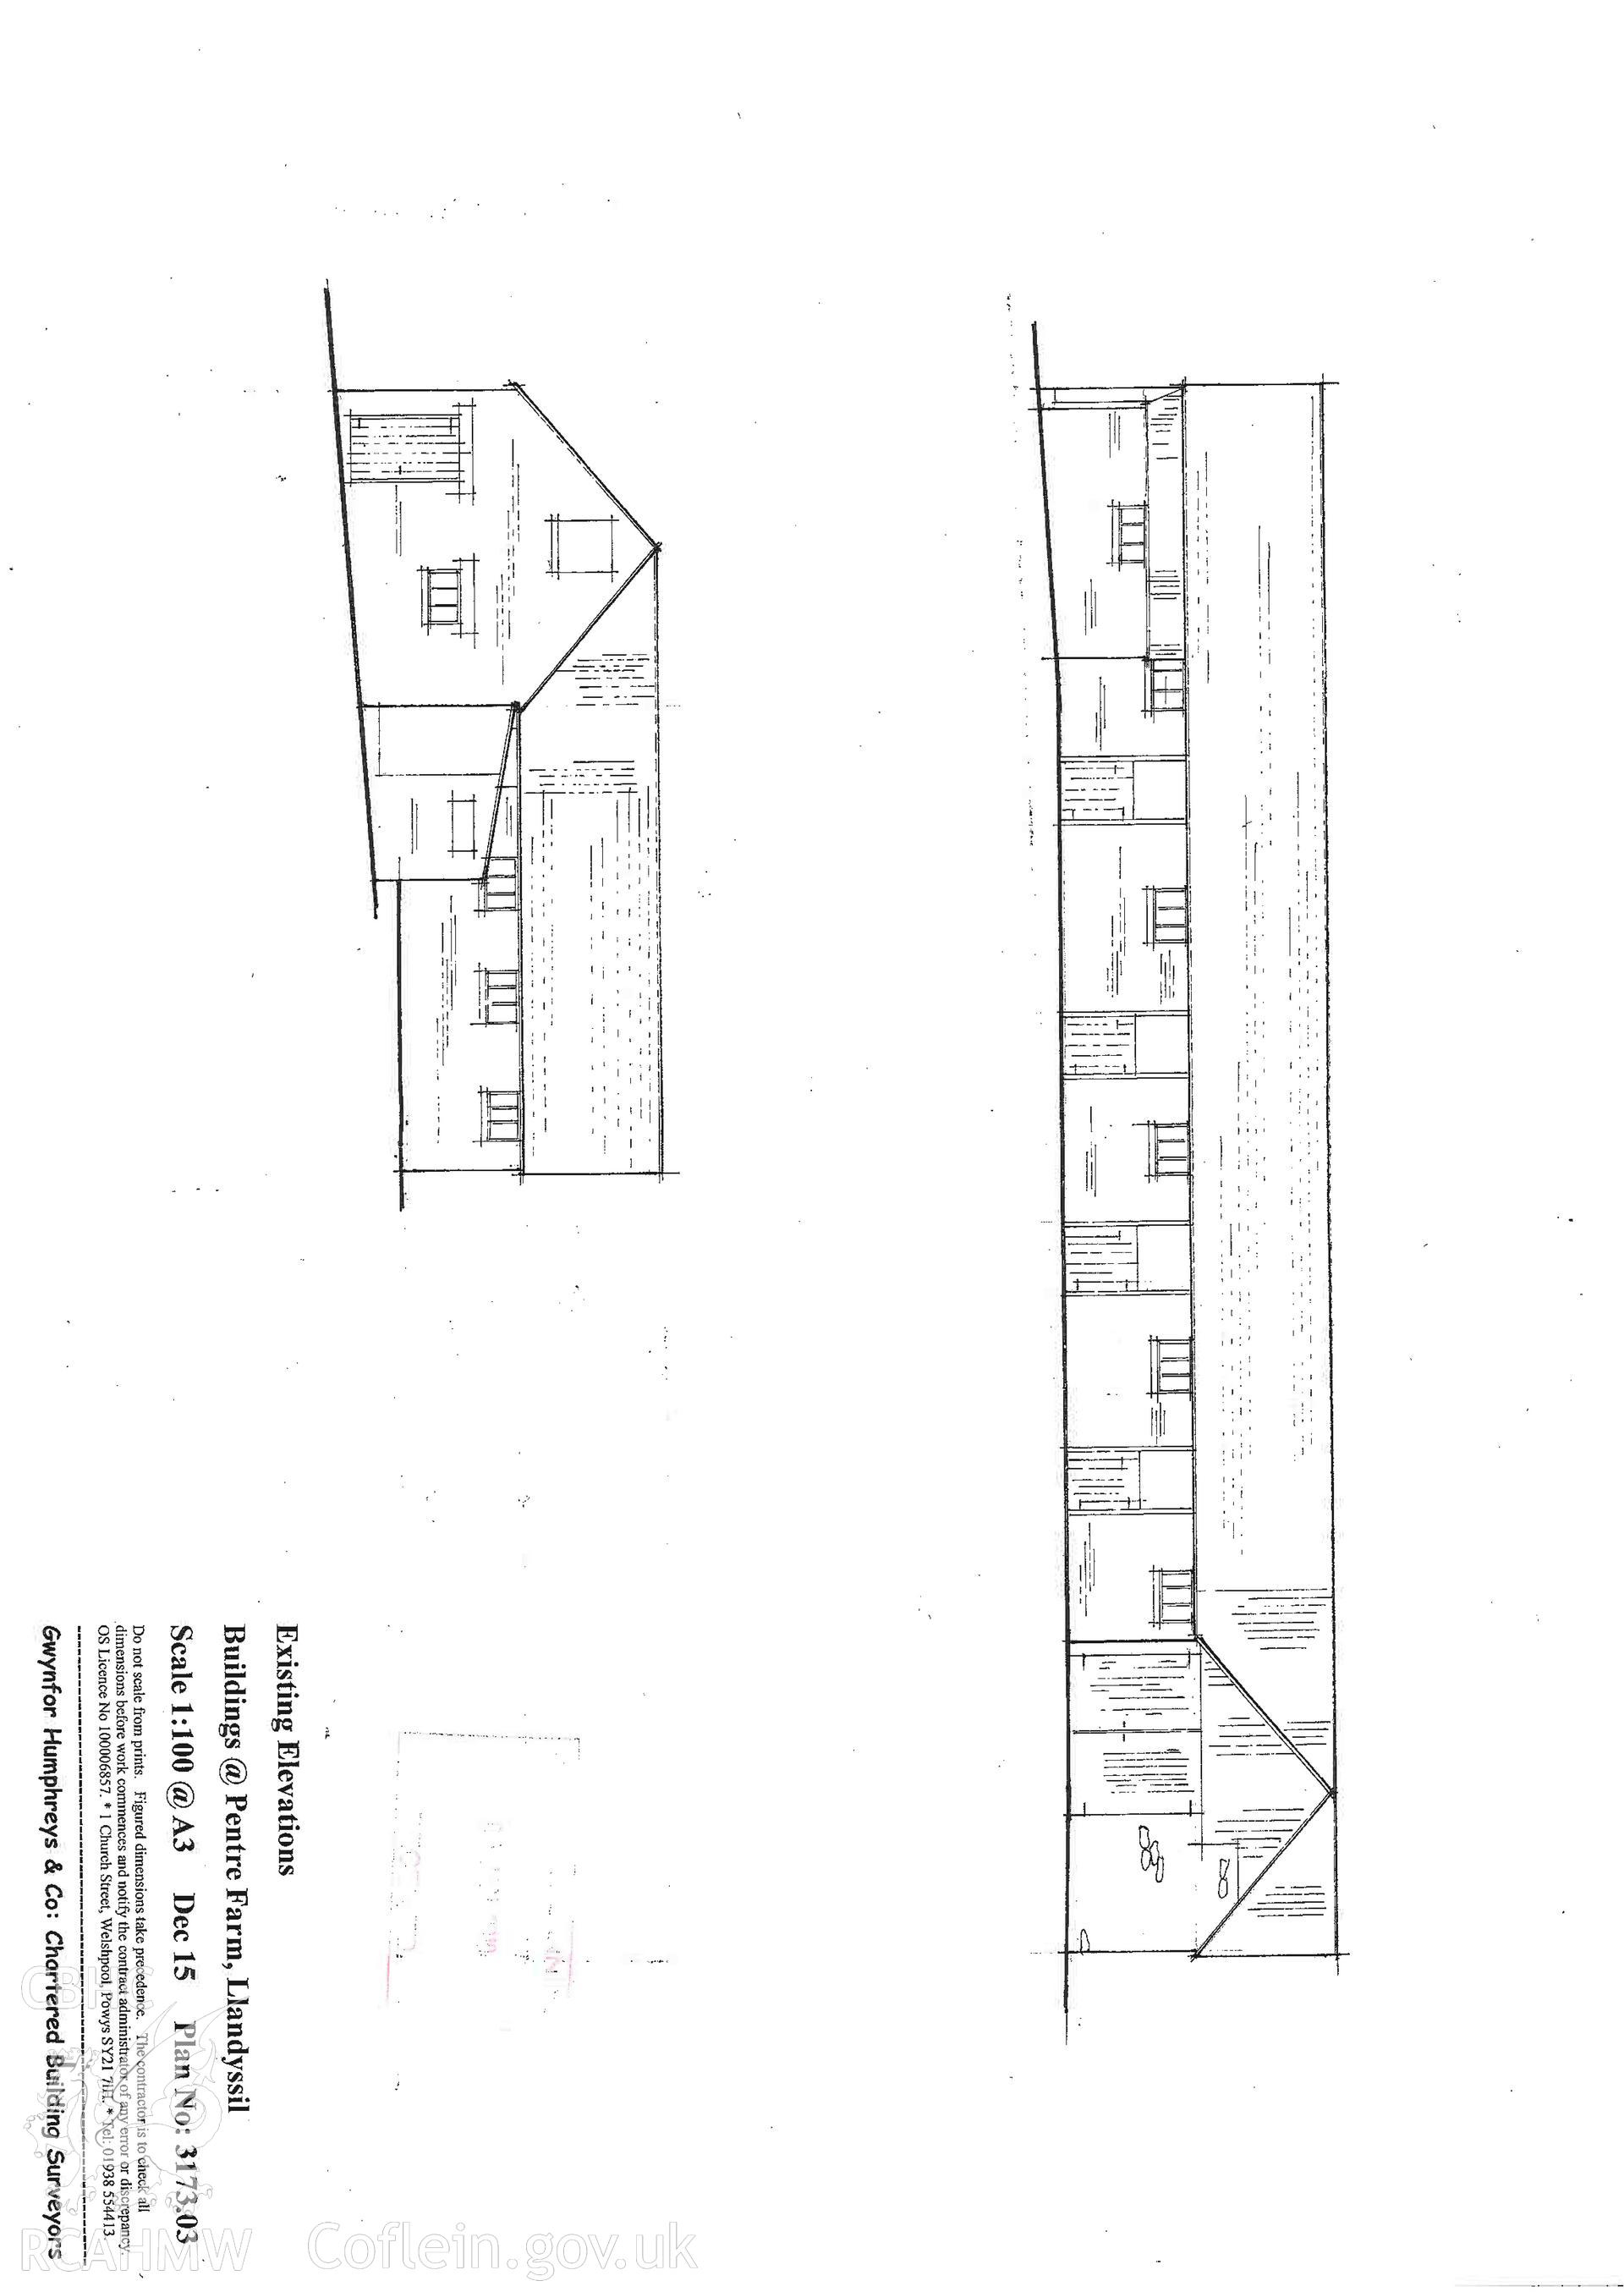 'Existing Elevation - Building A' used as report illustration for CPAT Project 2414: Pentre Barns, Llandyssil, Powys - Building Survey. Prepared by Kate Pack of Clwyd Powys Archaeological Trust, 2019. Report no. 1694.